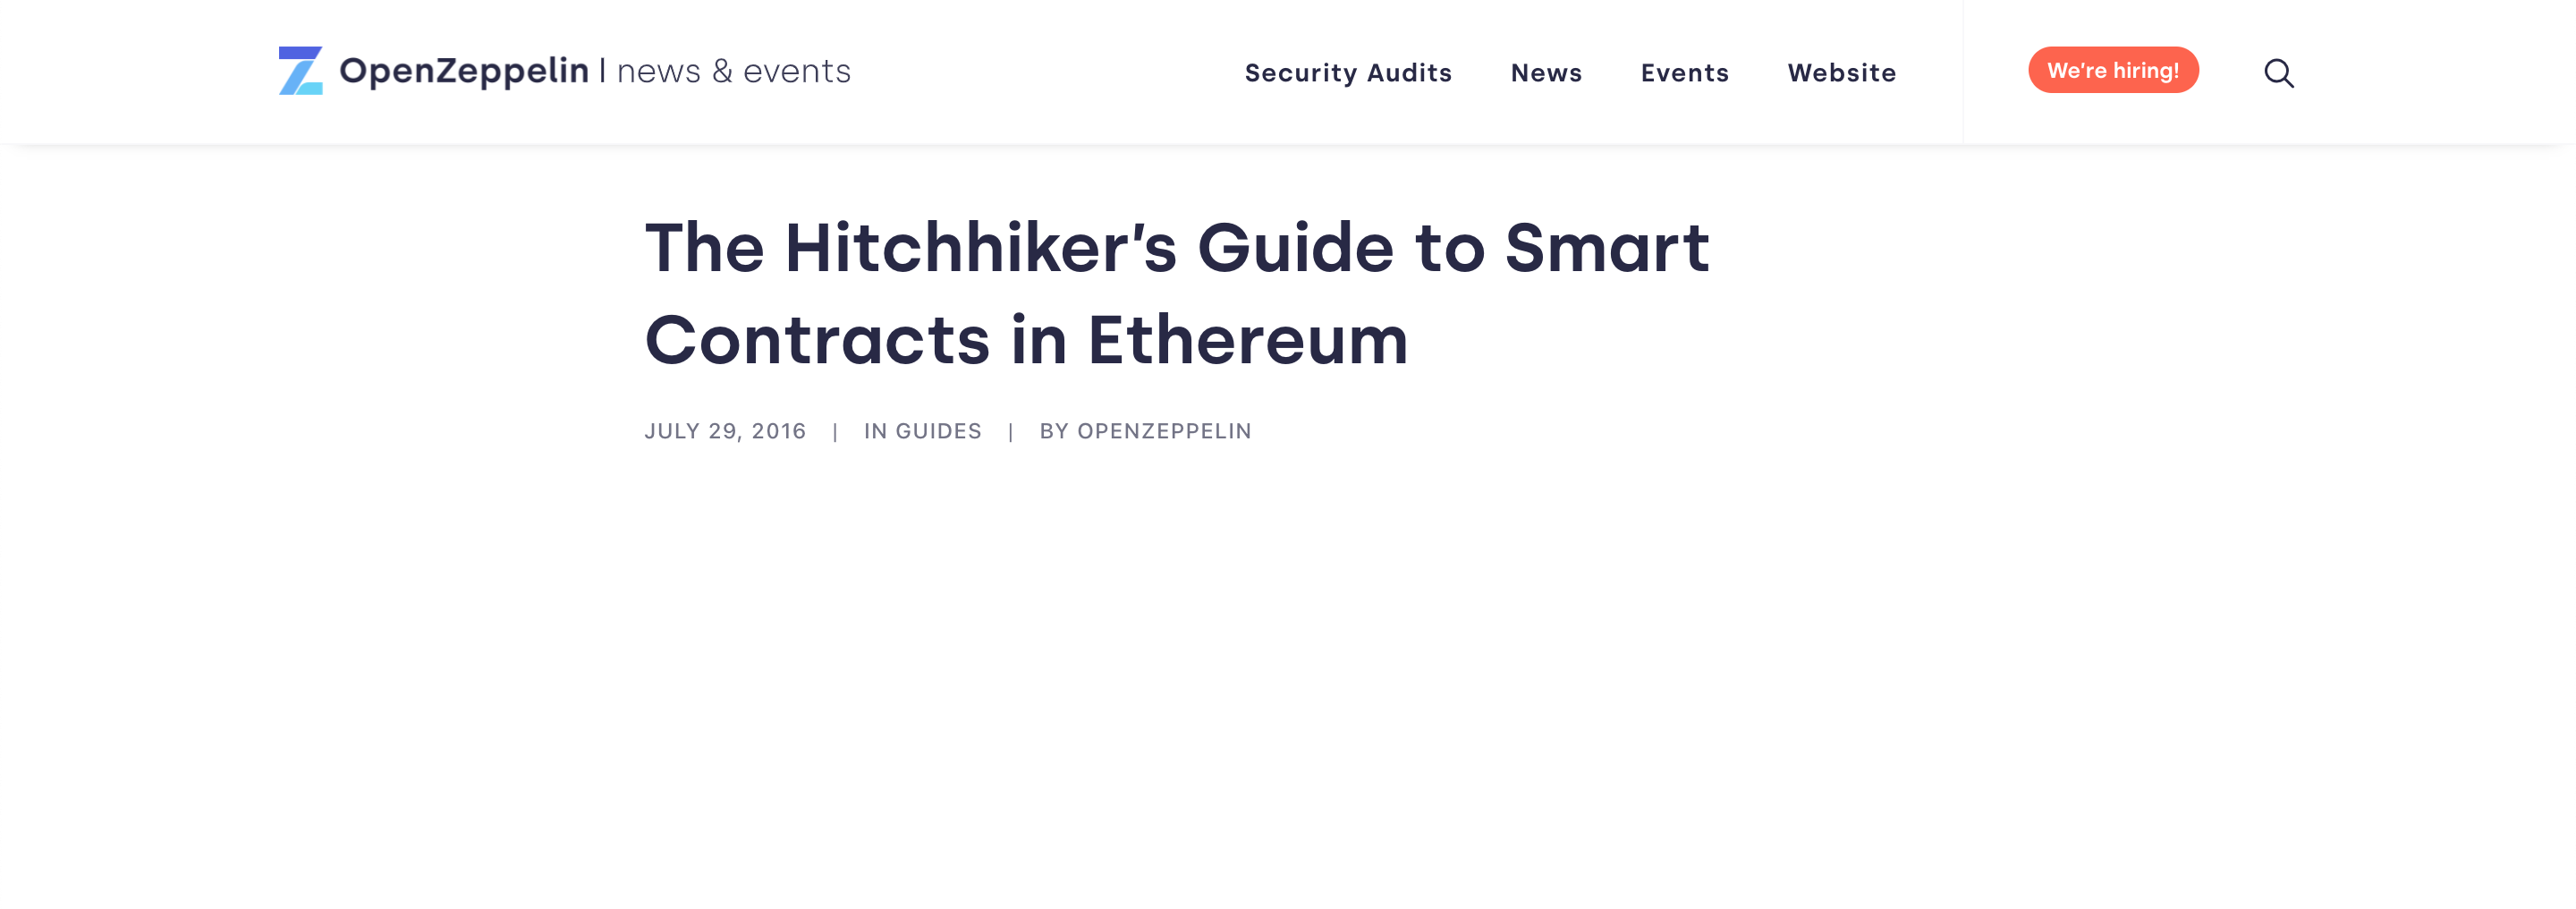 The Hitchhiker's Guide to Smart Contracts in Ethereum